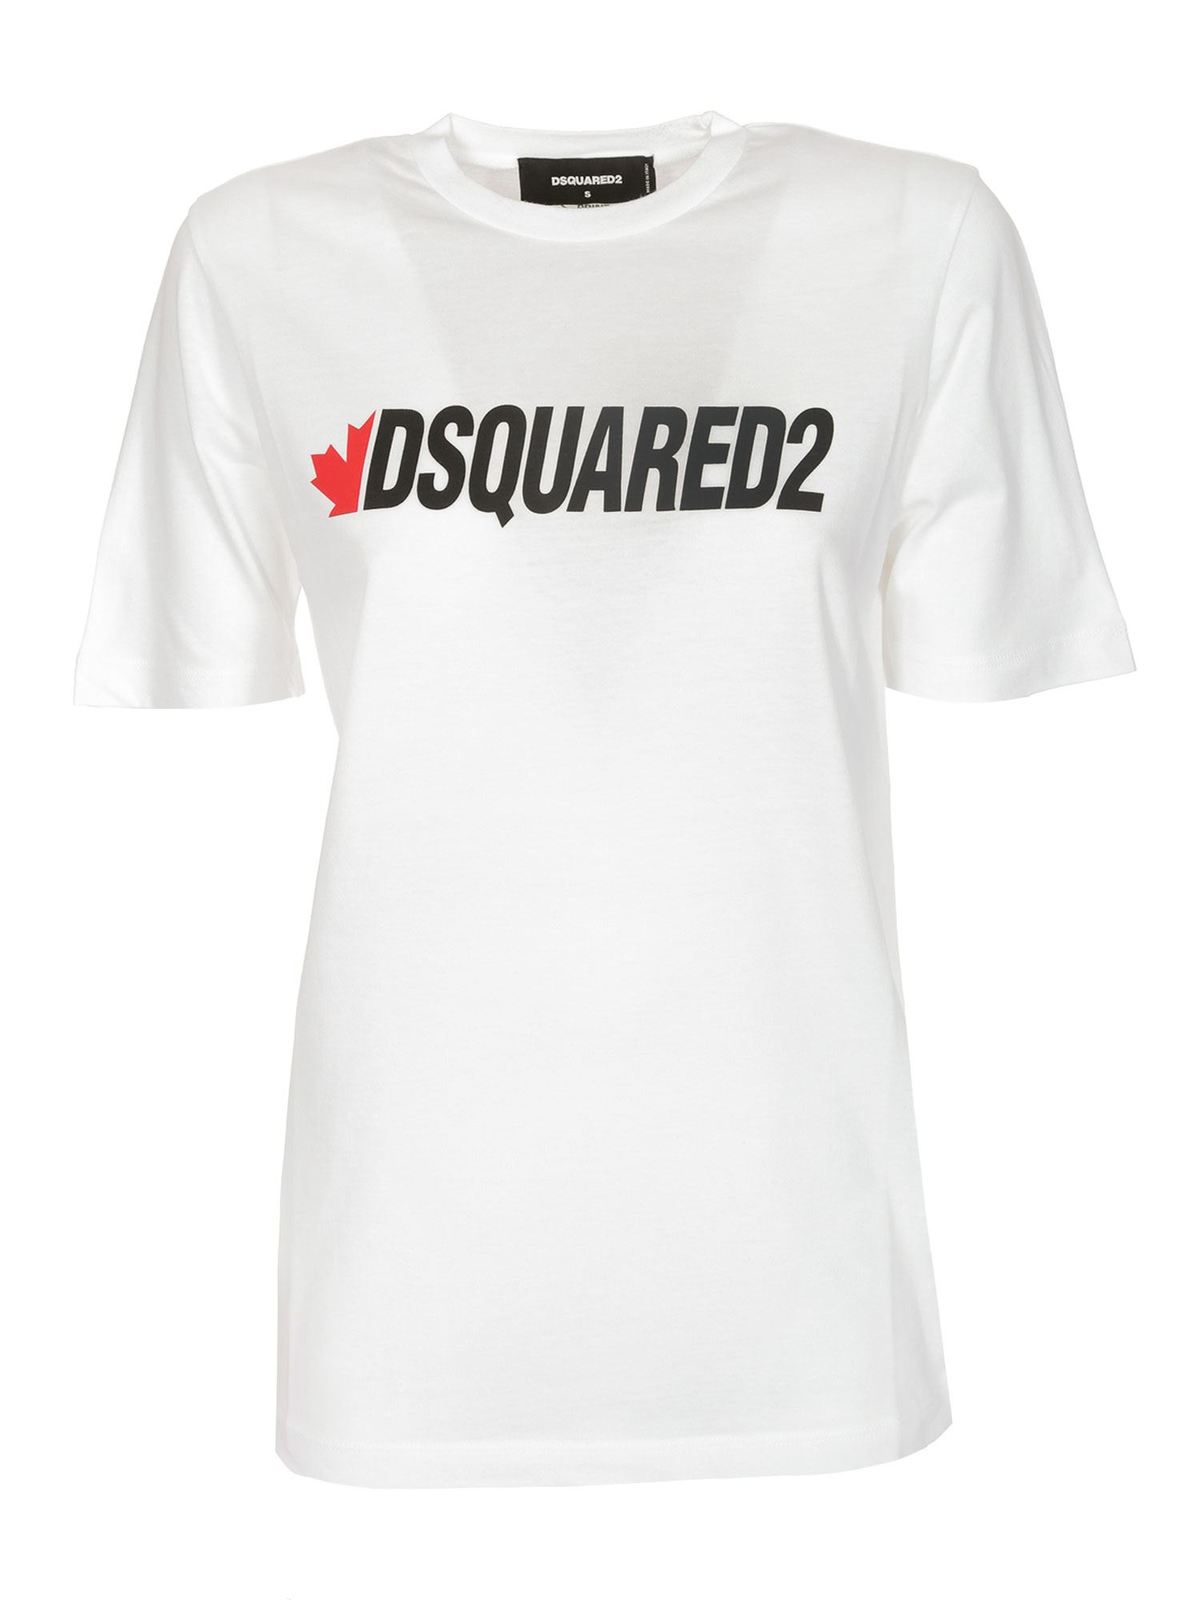 T-shirts Dsquared2 - Dsquared2 T-shirt in white - S75GD0180S21600100